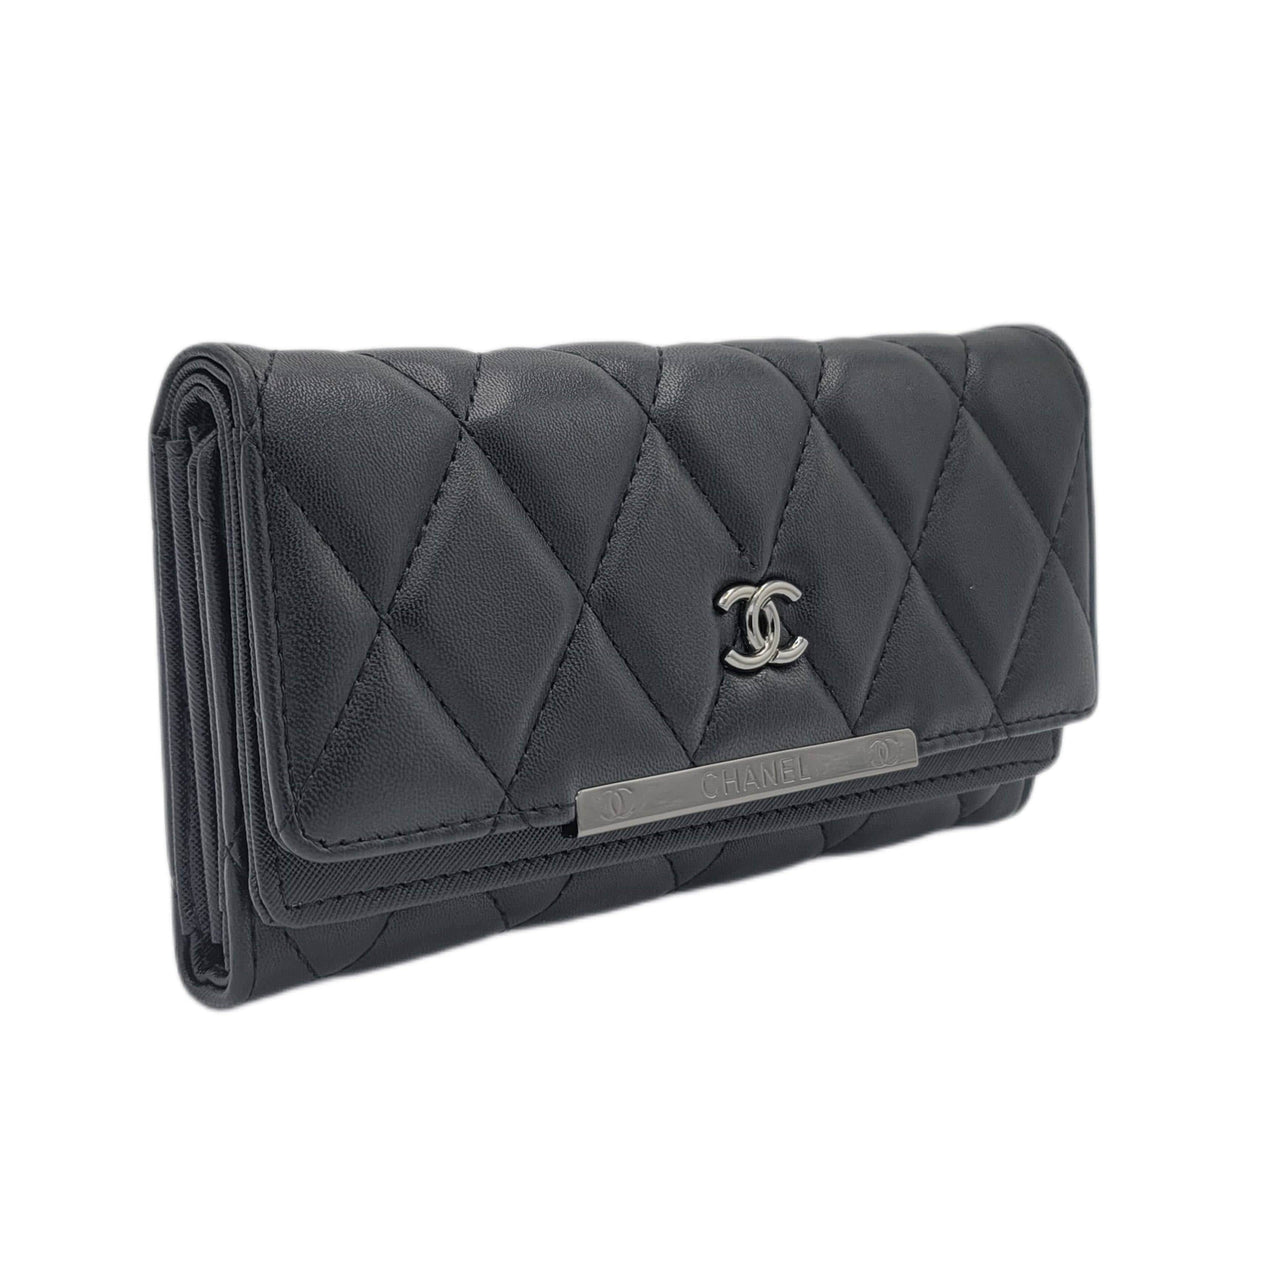 The Bag Couture Luggage & Bags Black Chanel 3 Fold Wallet Black & Beige